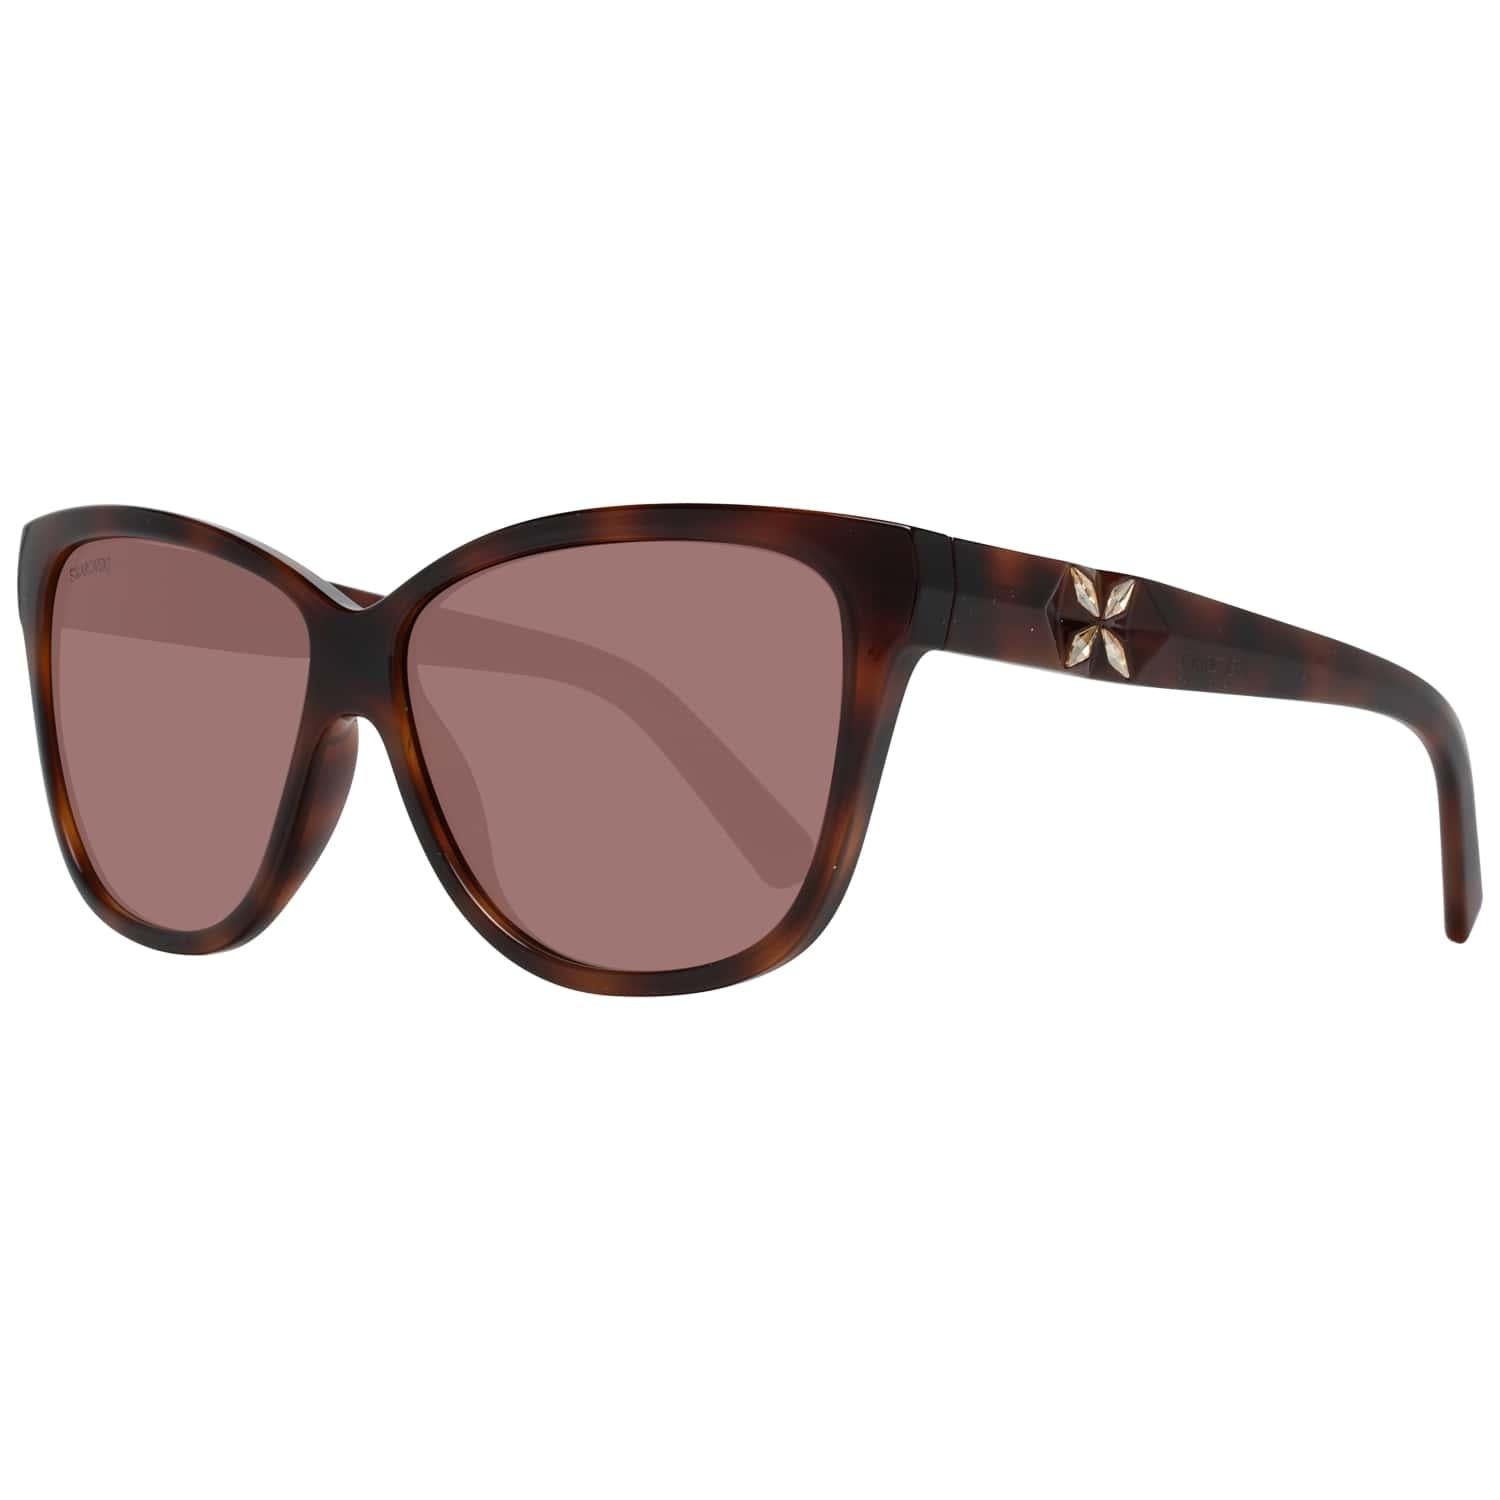 DetailsMATERIAL: AcetateCOLOR: BrownMODEL: SK0188 5952FGENDER: WomenCOUNTRY OF MANUFACTURE: ChinaTYPE: SunglassesORIGINAL CASE?: YesSTYLE: ButterflyOCCASION: CasualFEATURES: LightweightLENS COLOR: BrownLENS TECHNOLOGY: GradientYEAR MANUFACTURED: